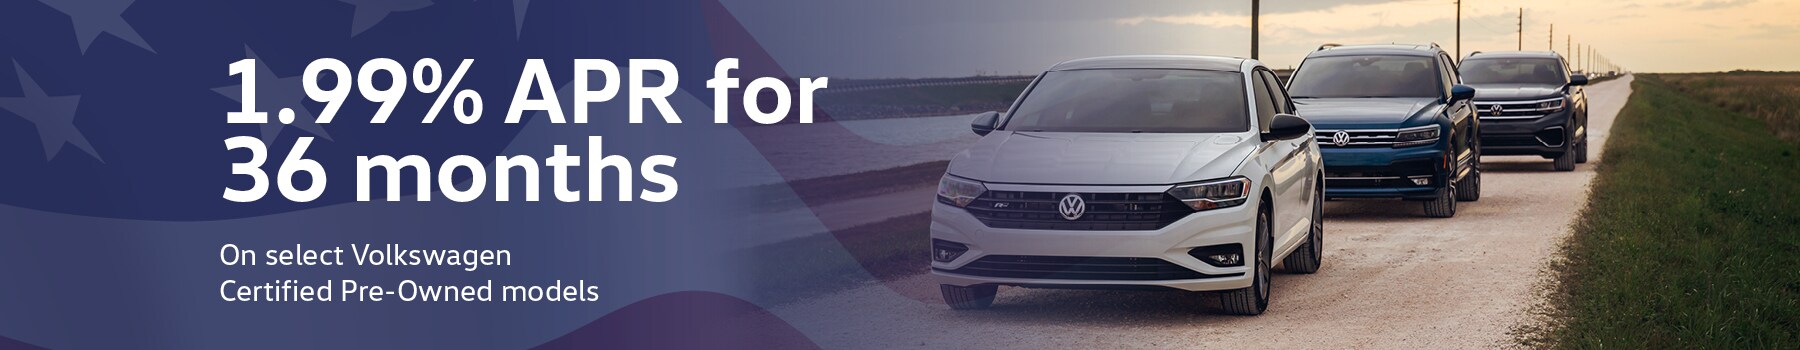 1.99% APR For 36 months on select Volkswagen Certified Pre-Owned models.